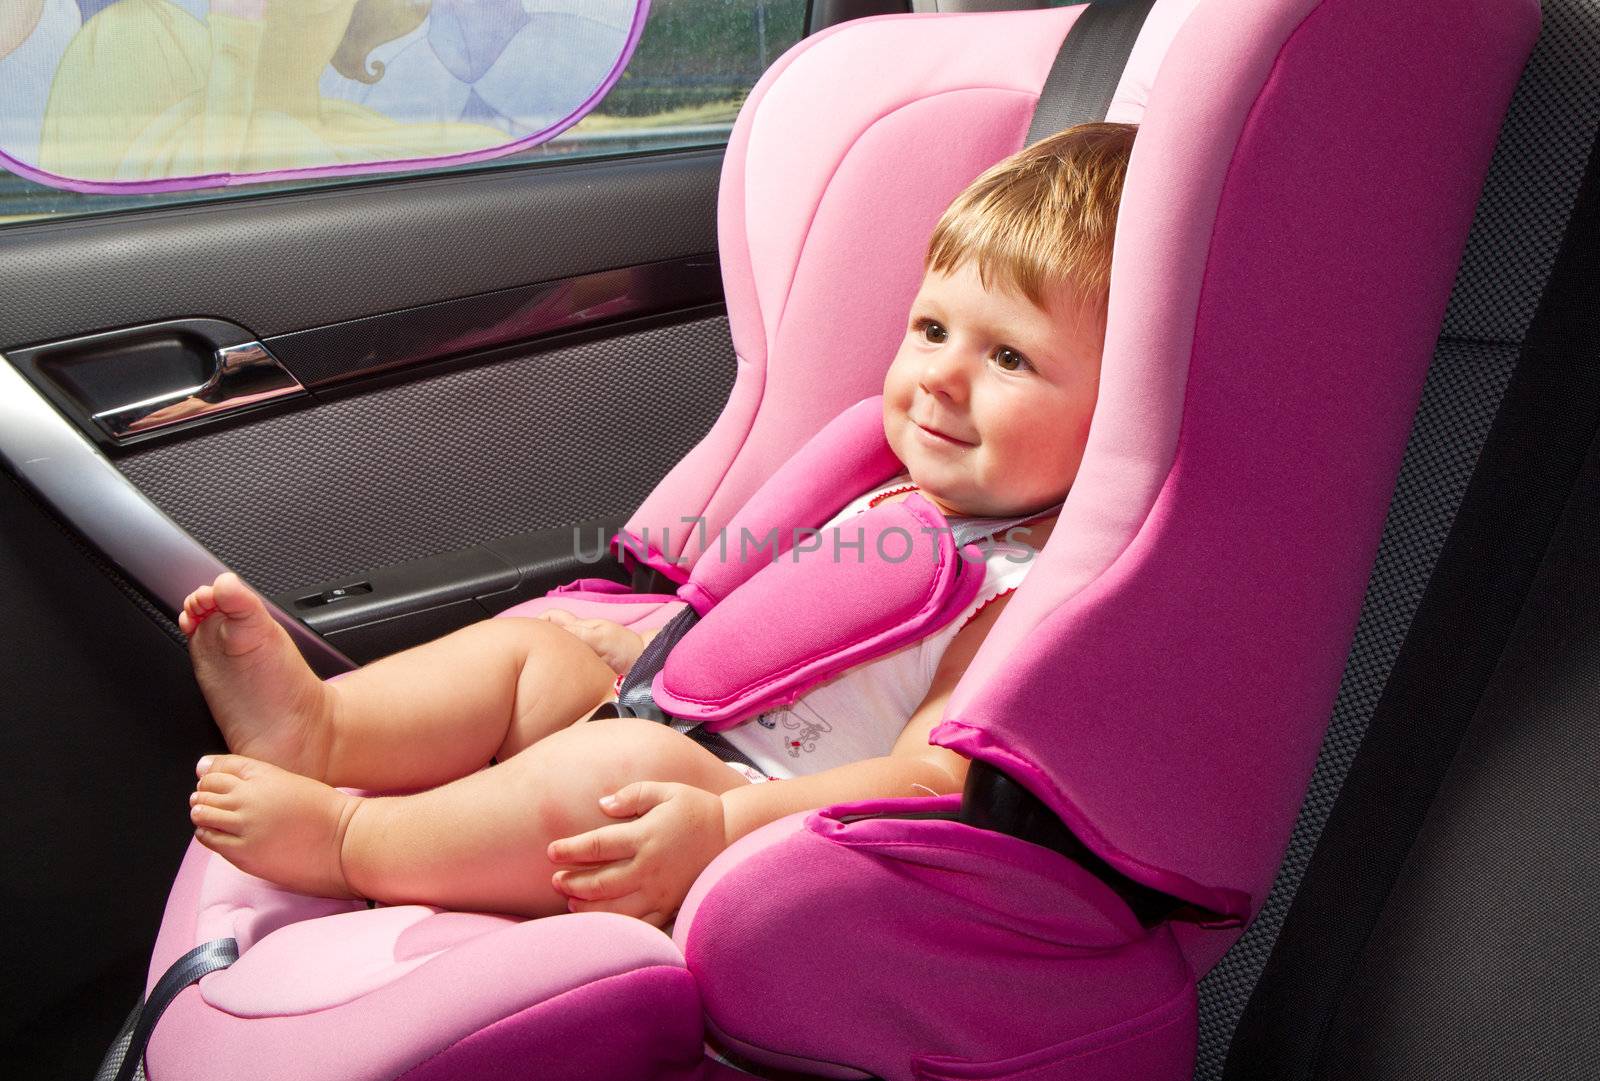 baby in a safety car seat. Safety and security 